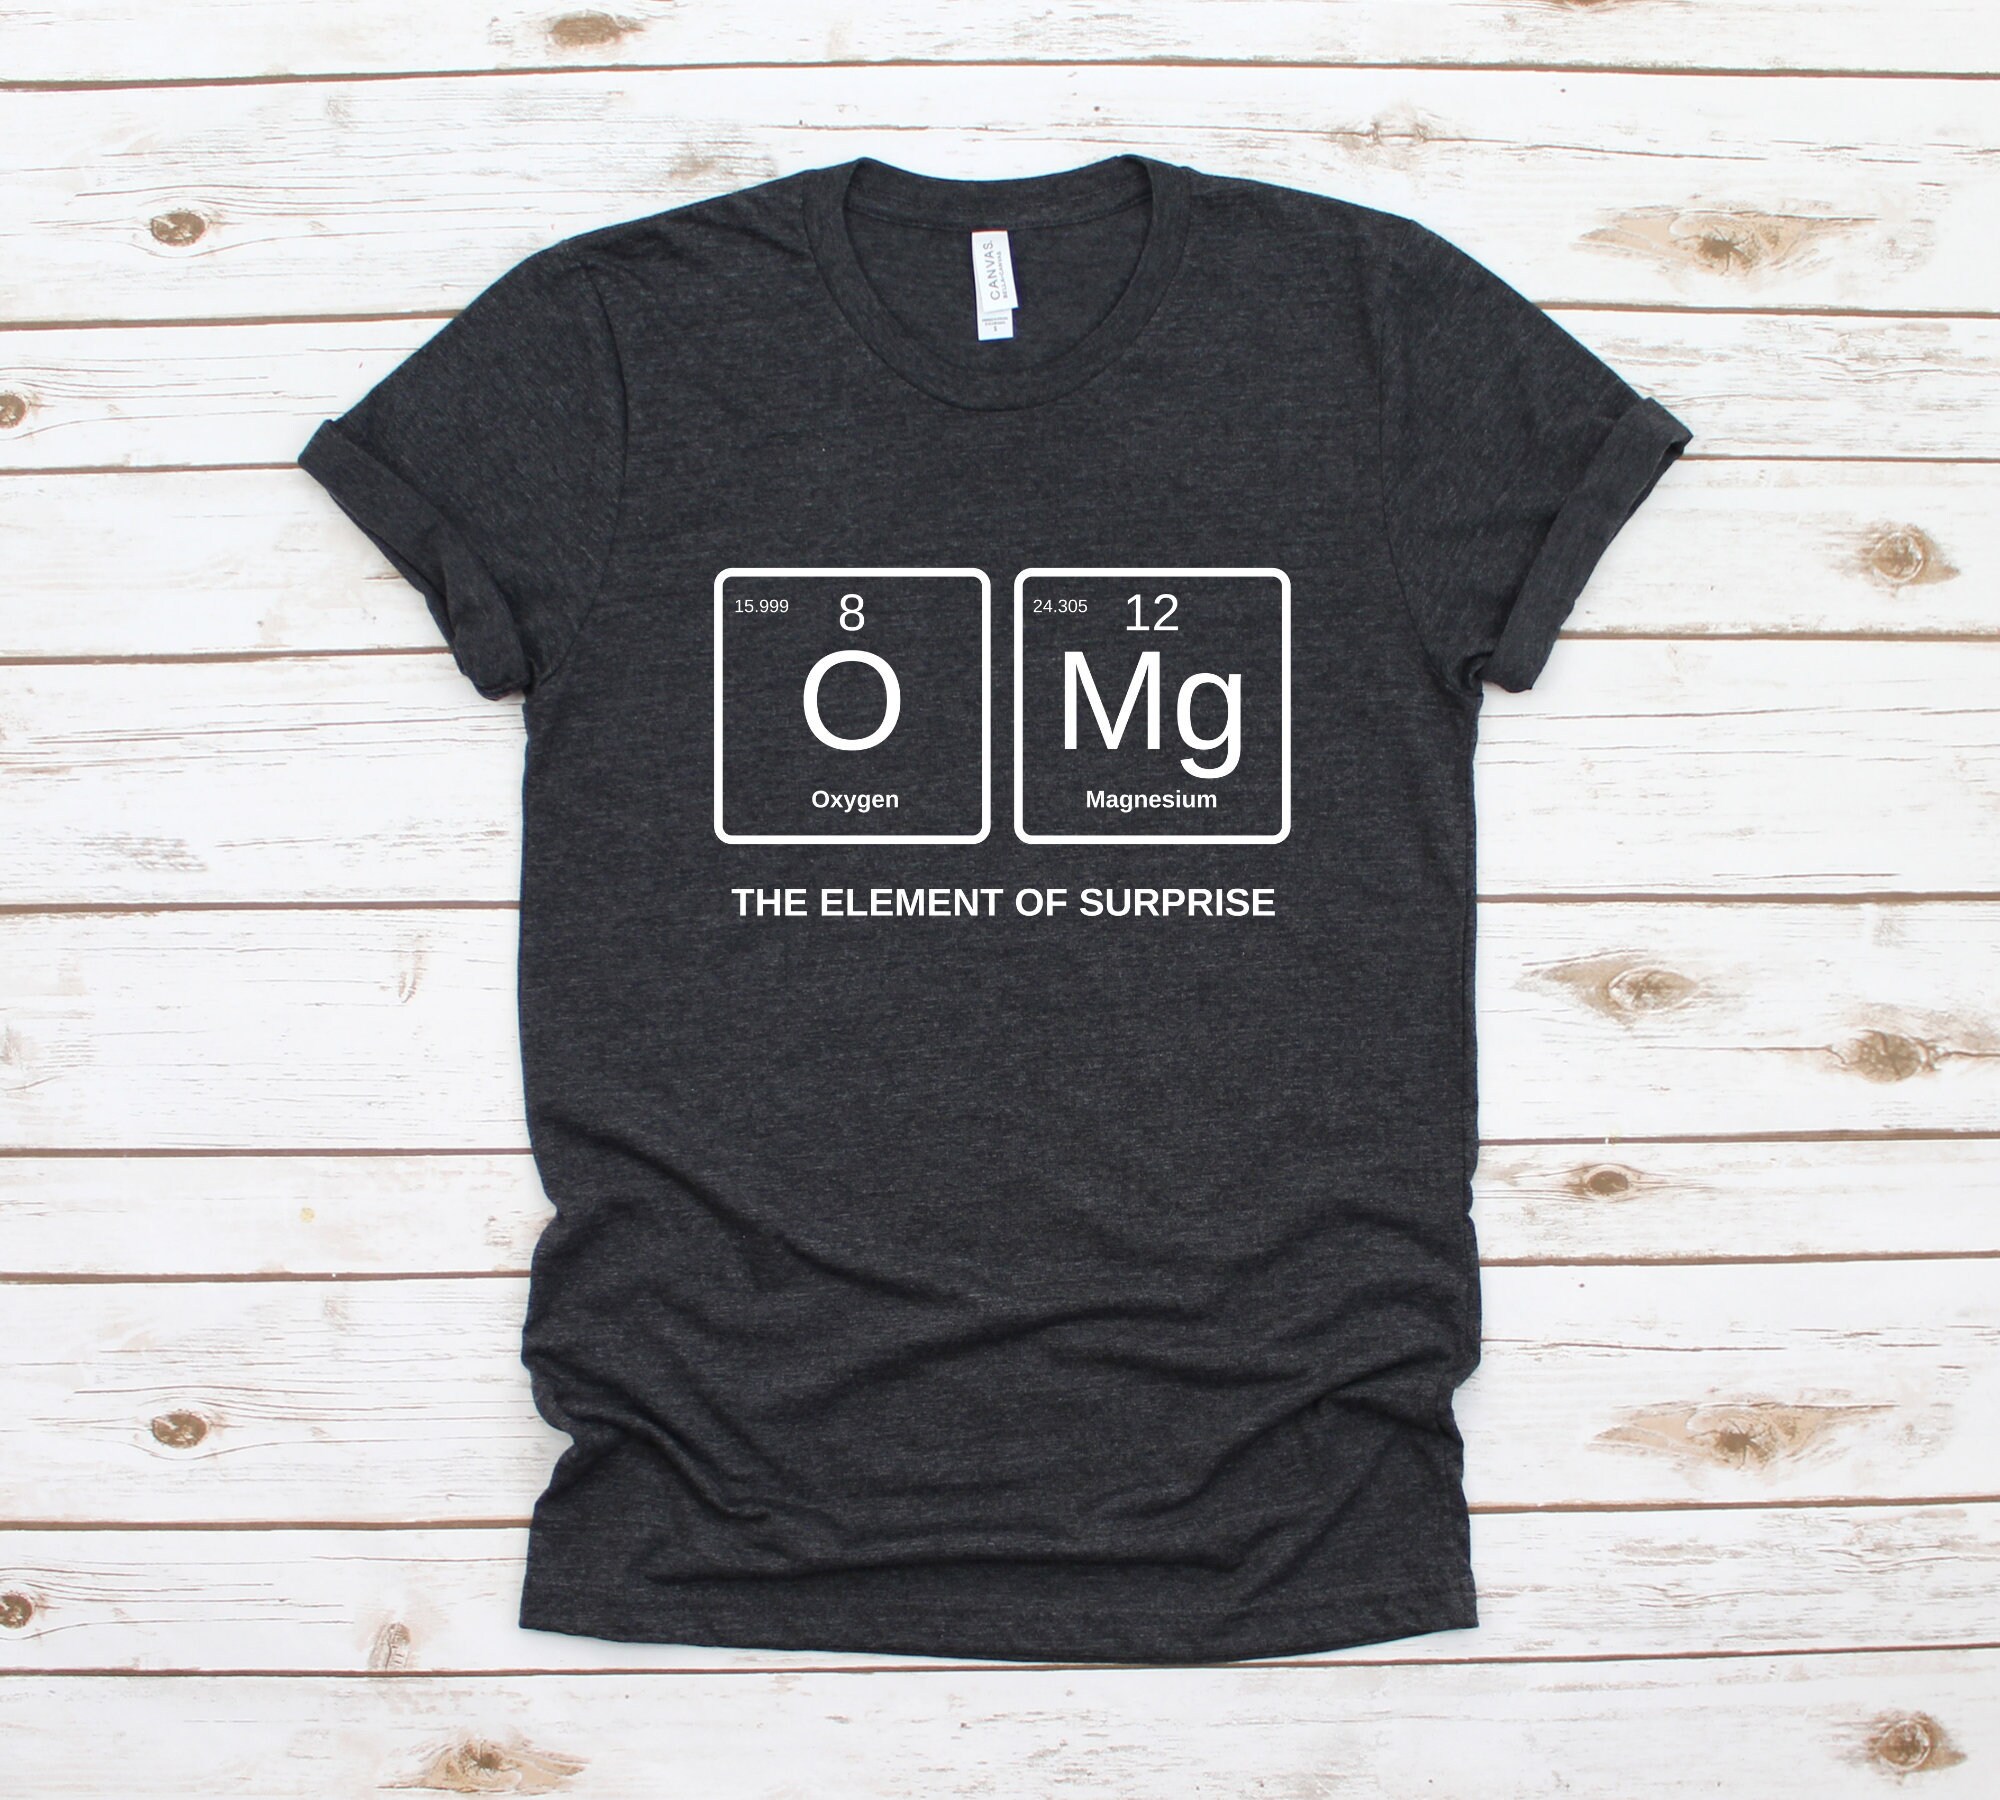 Chemical Elements Shirt, OMG the Element of Surprise, OMG Elements ...